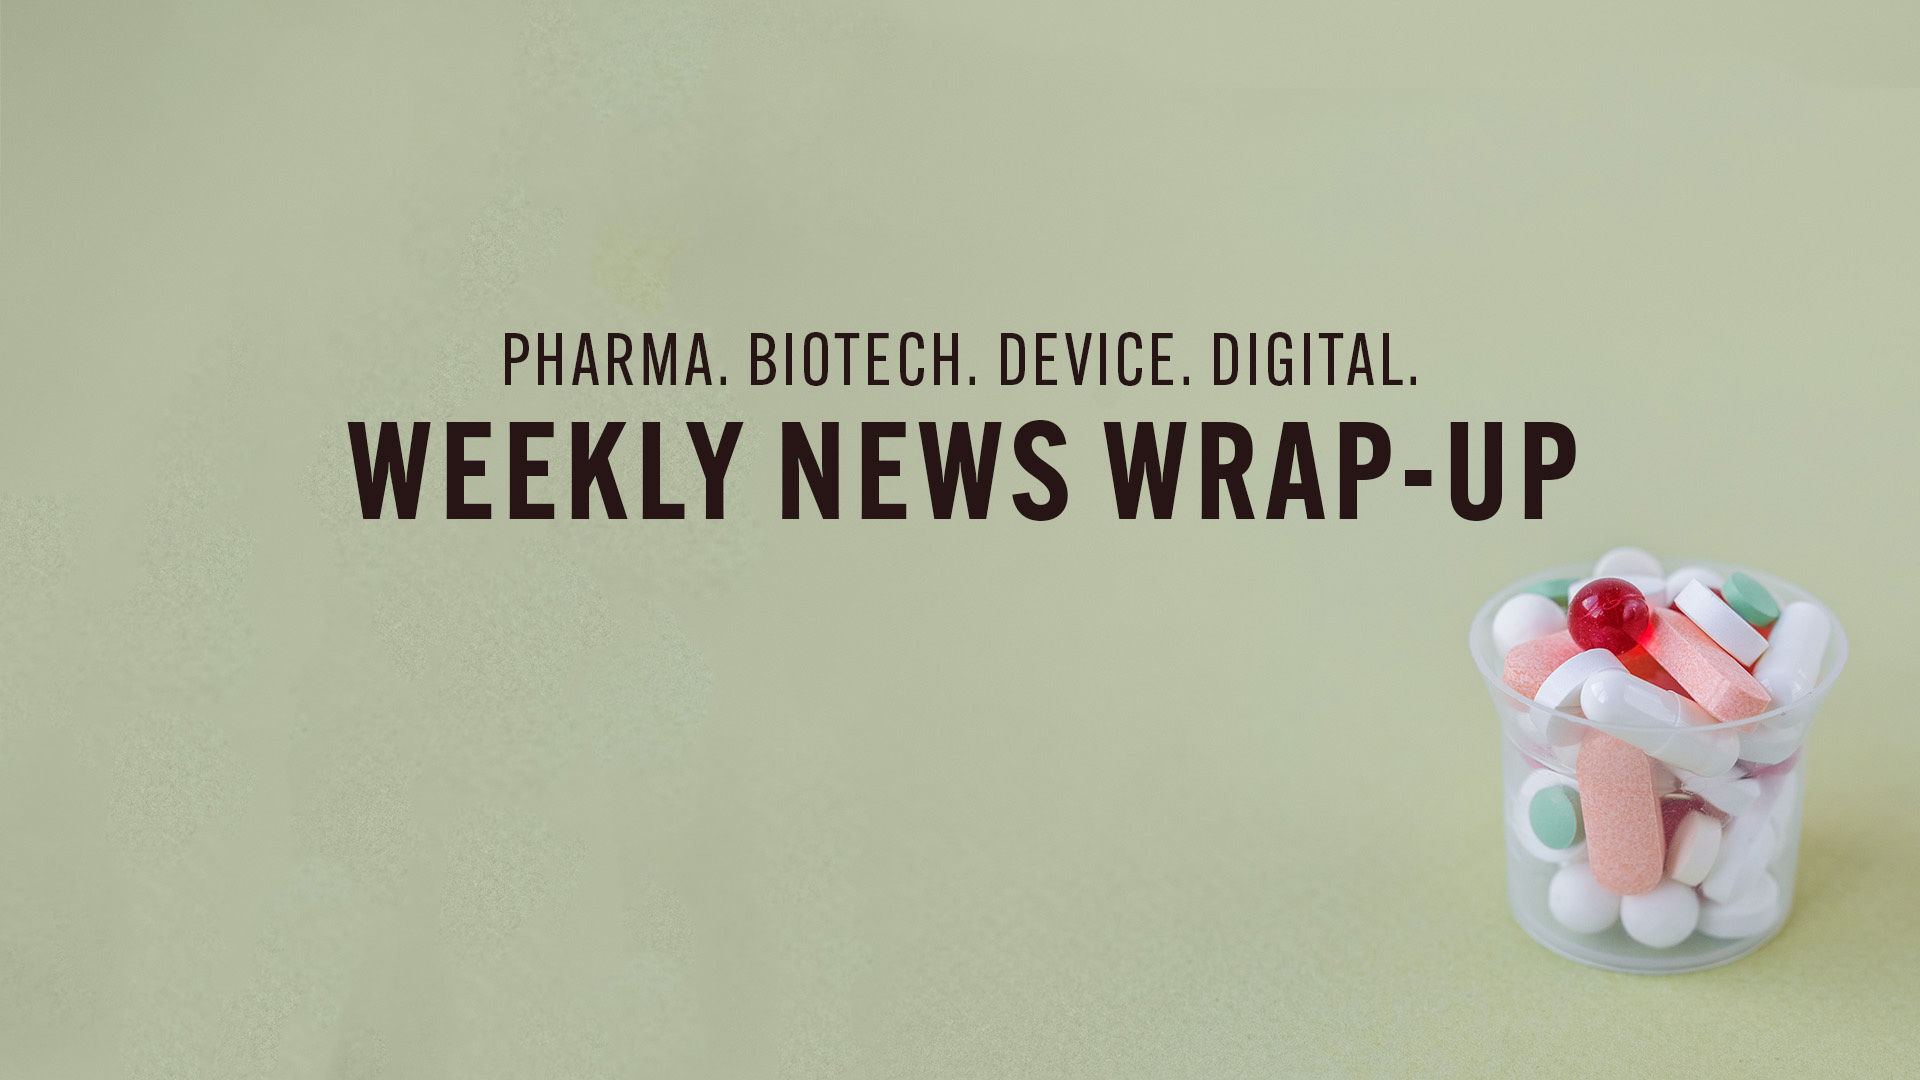 Healthcare Industry News Weekly Wrap-Up: October 28, 2022